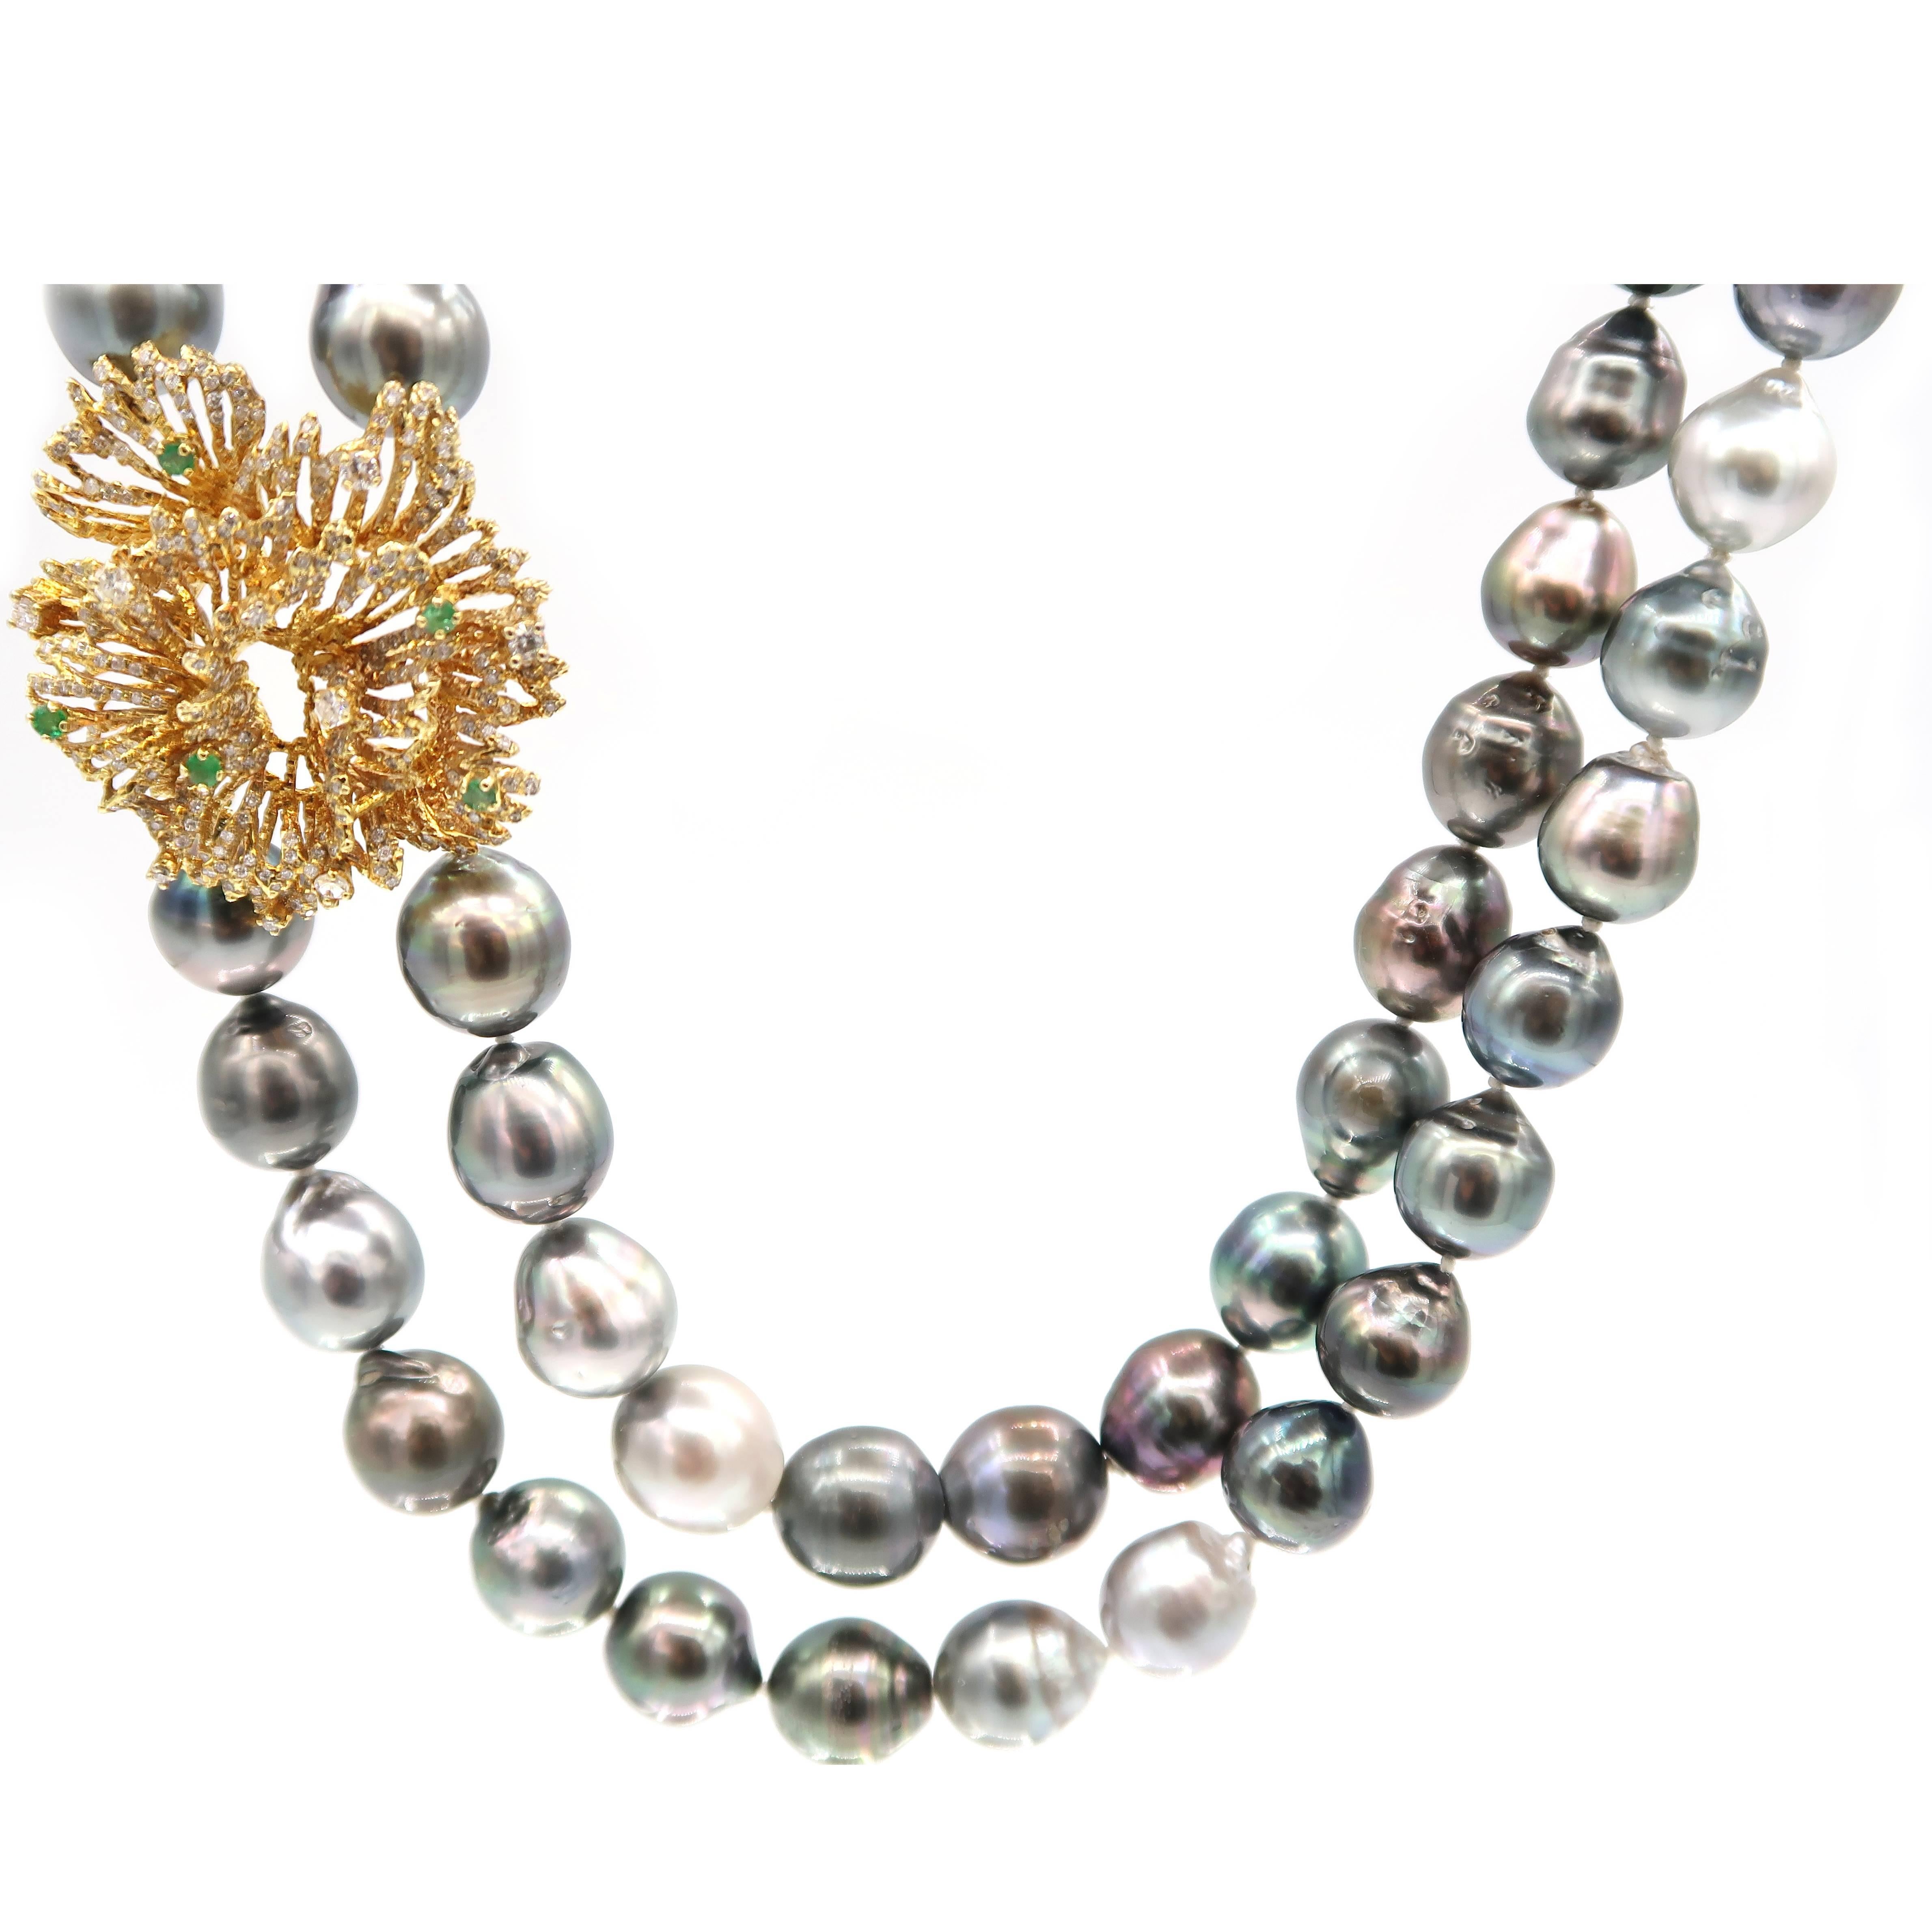 Shimmering diamond pendant with a spray of emerald complementing double-strand multicoloured natural Baroque Tahitian pearls. 

Metal: 18K Gold, 23.86 g
Diamond: 1.40 ct
Emerald: 0.40 ct
Pearl: Tahitian baroque

Inner Length: 21.25 inches
Outer